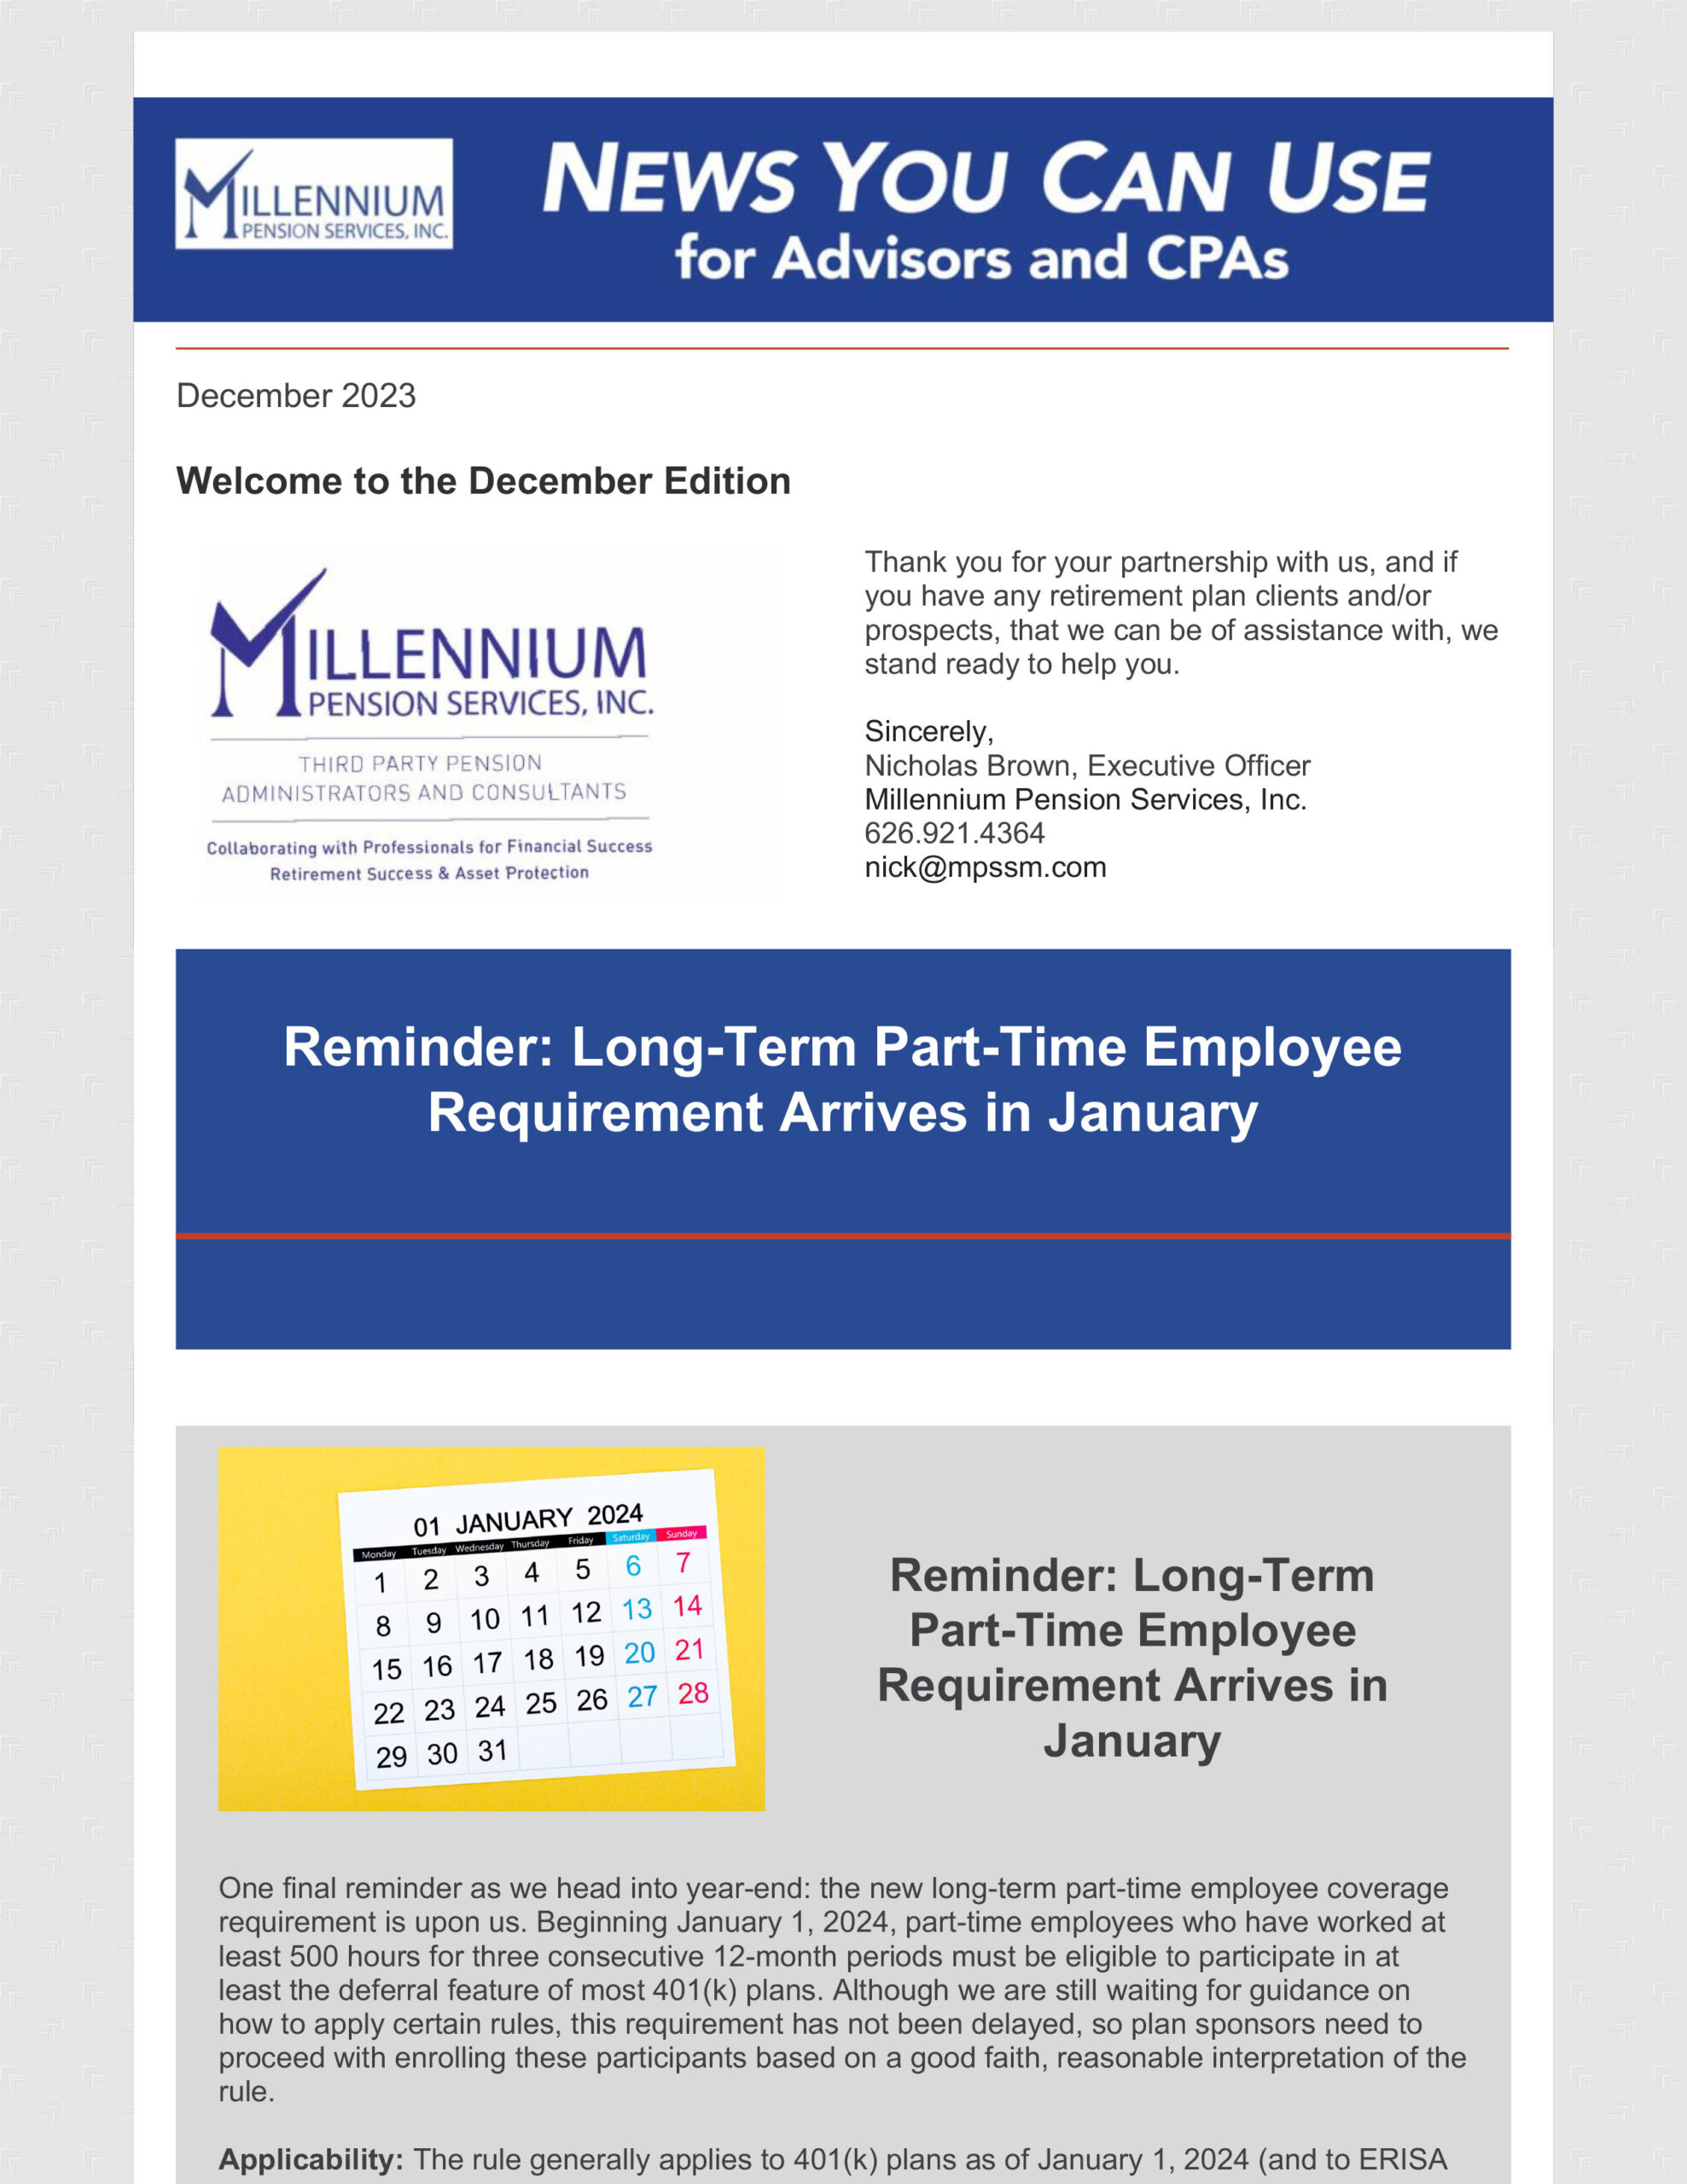 Millennium Pension Services News You Can Use for December pg 1